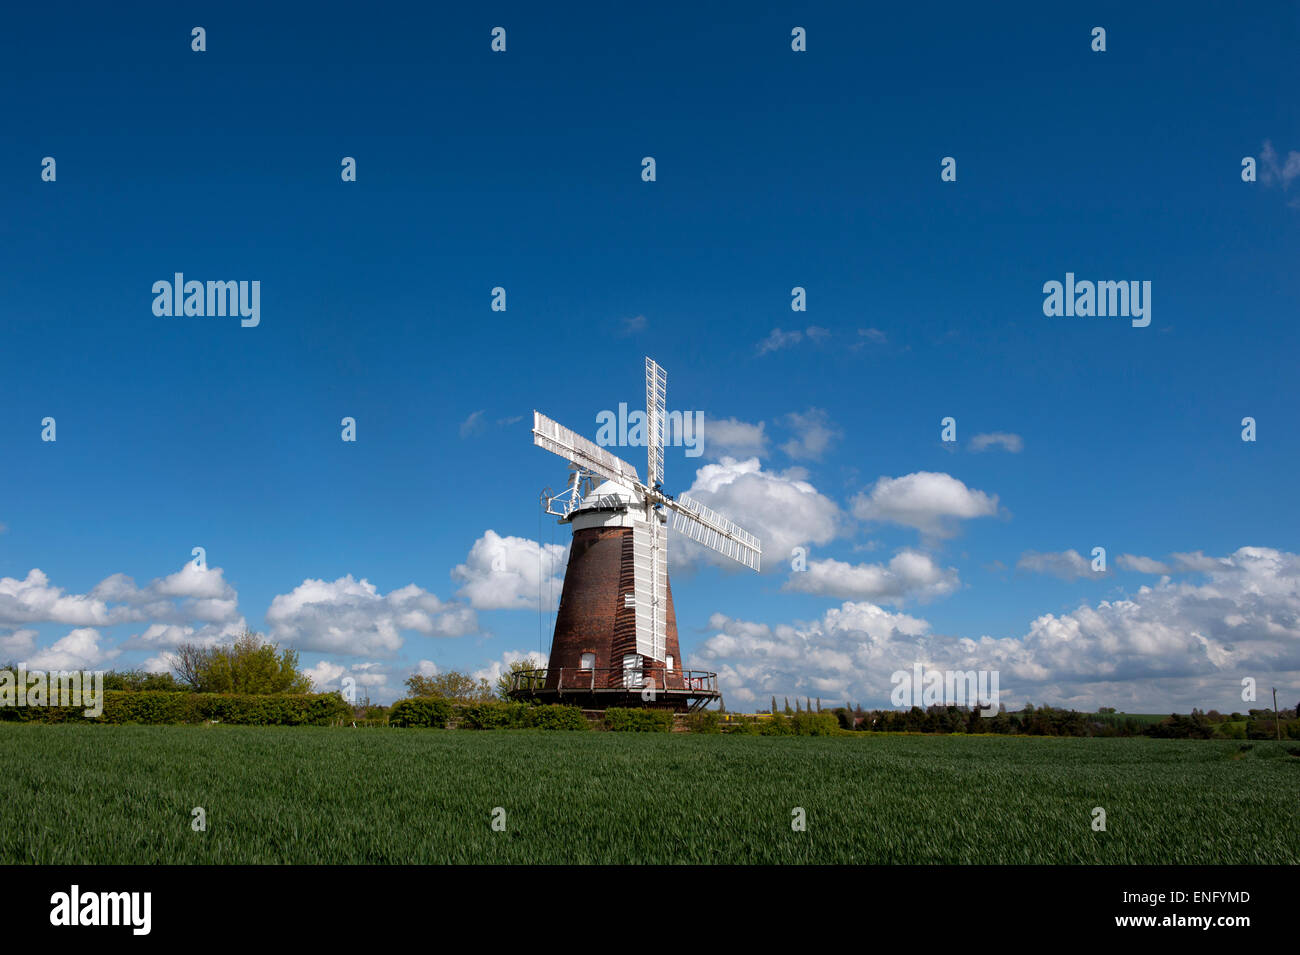 Thaxted  John Webb's Windmill, Thaxted, Essex,England. May 2015 Stock Photo